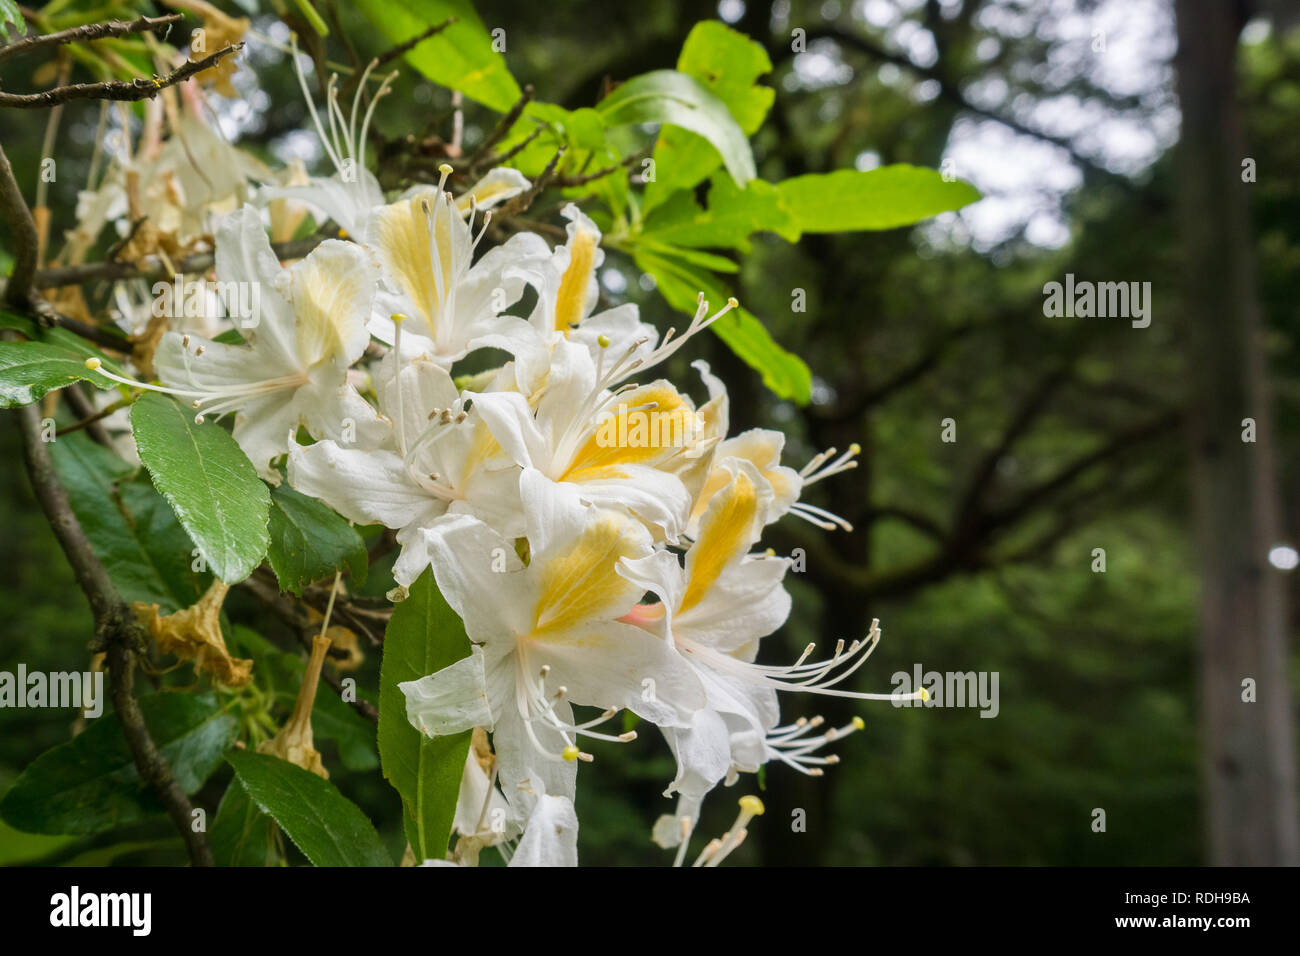 Western Azalea (Rhododendron occidentale) flowers blooming in Big Basin Redwoods State Park, California Stock Photo